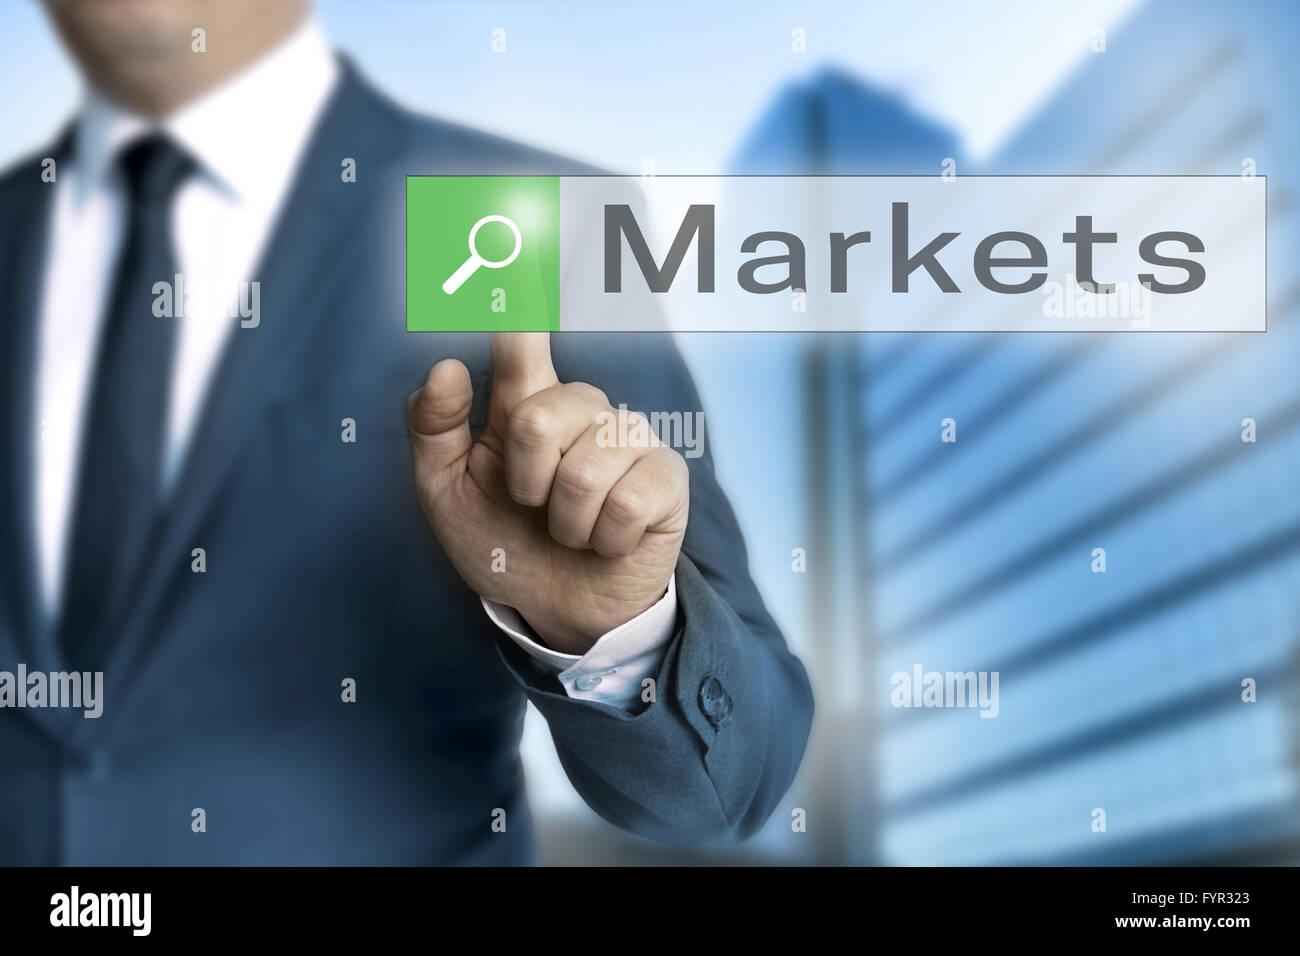 Markets browser is operated by businessman. Stock Photo